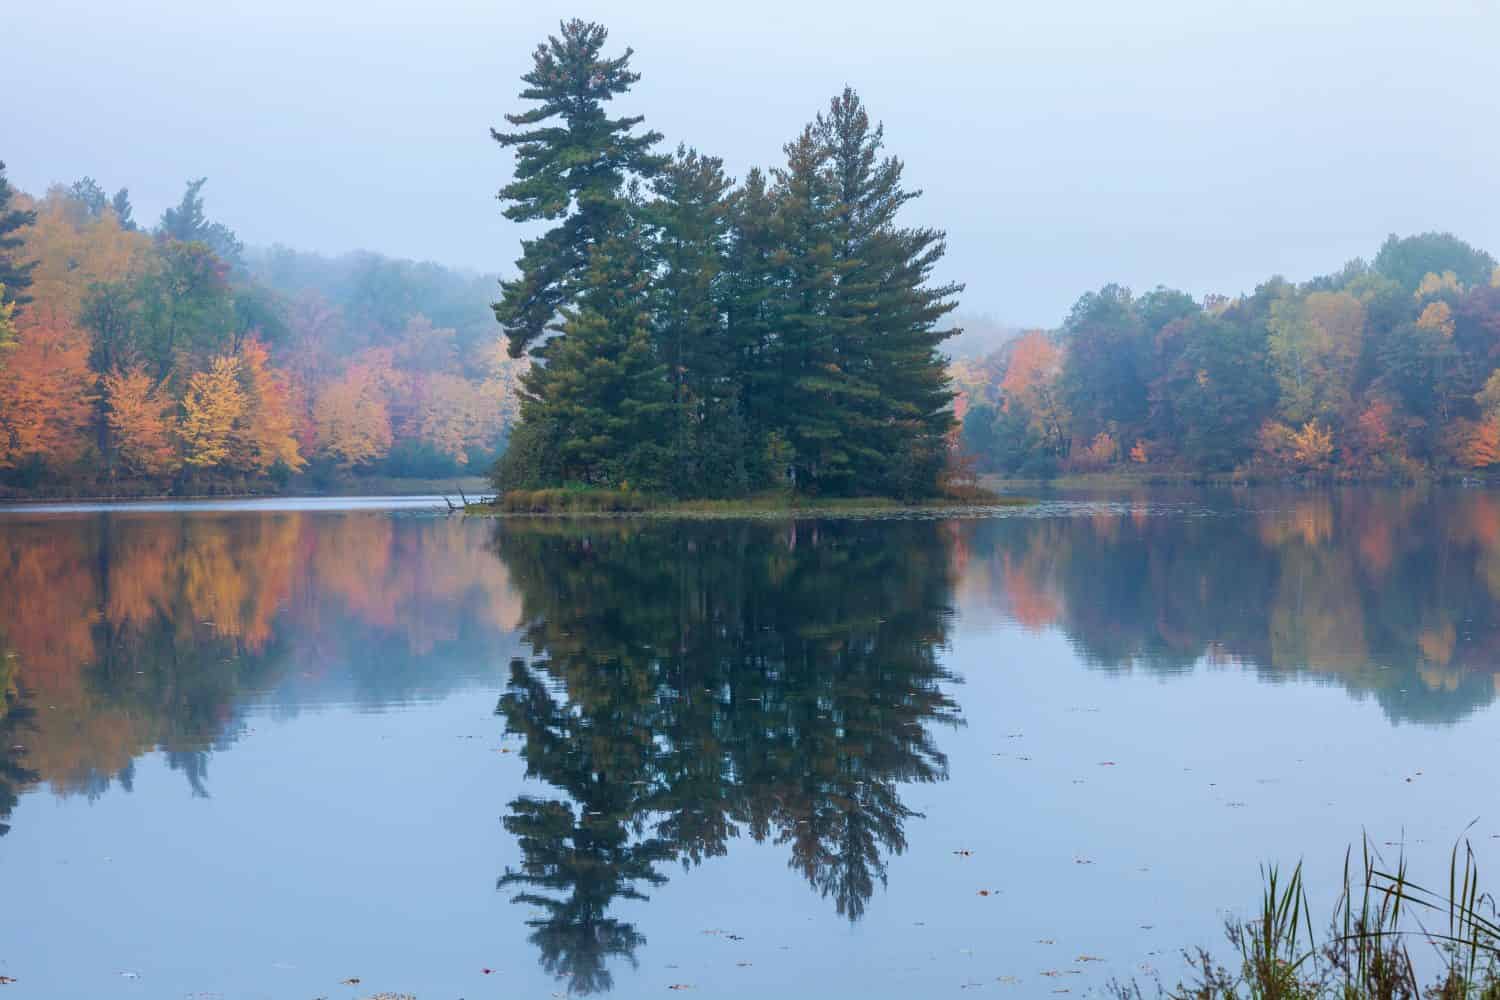 Calm lake and fog in northern Minnesota with trees in autumn color and pines on a small island